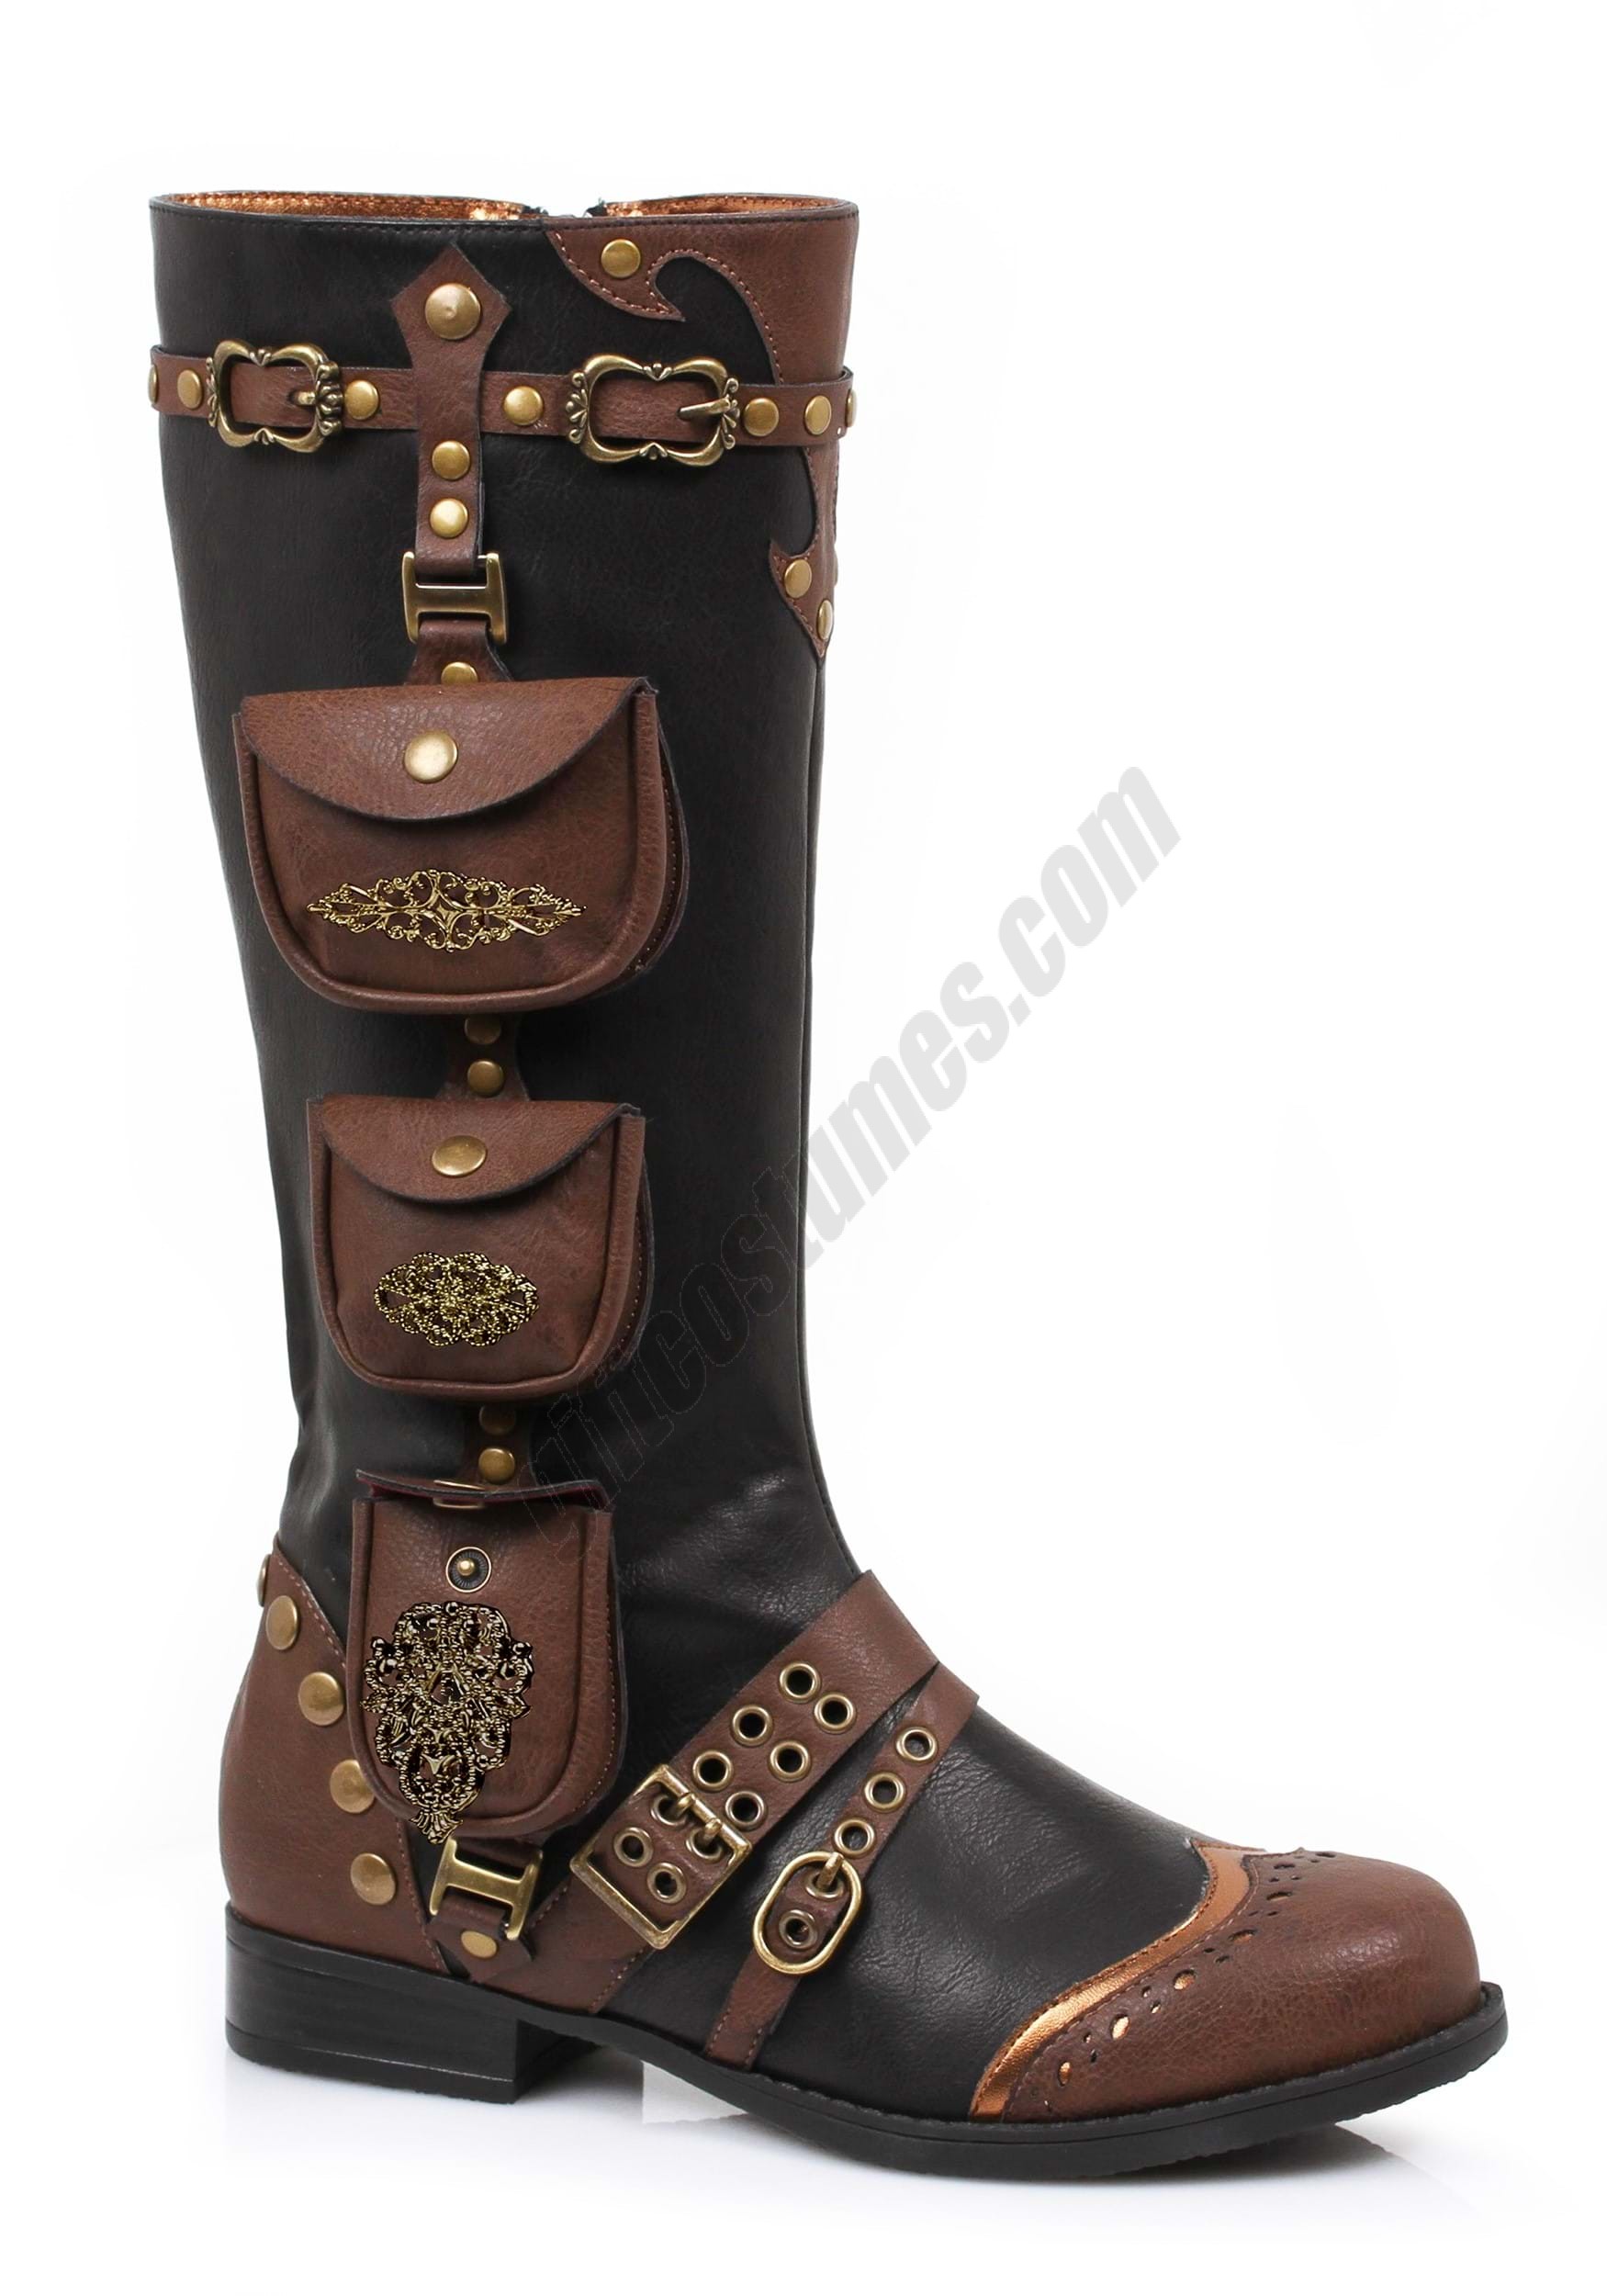 Steampunk Boots for Women Promotions - Steampunk Boots for Women Promotions